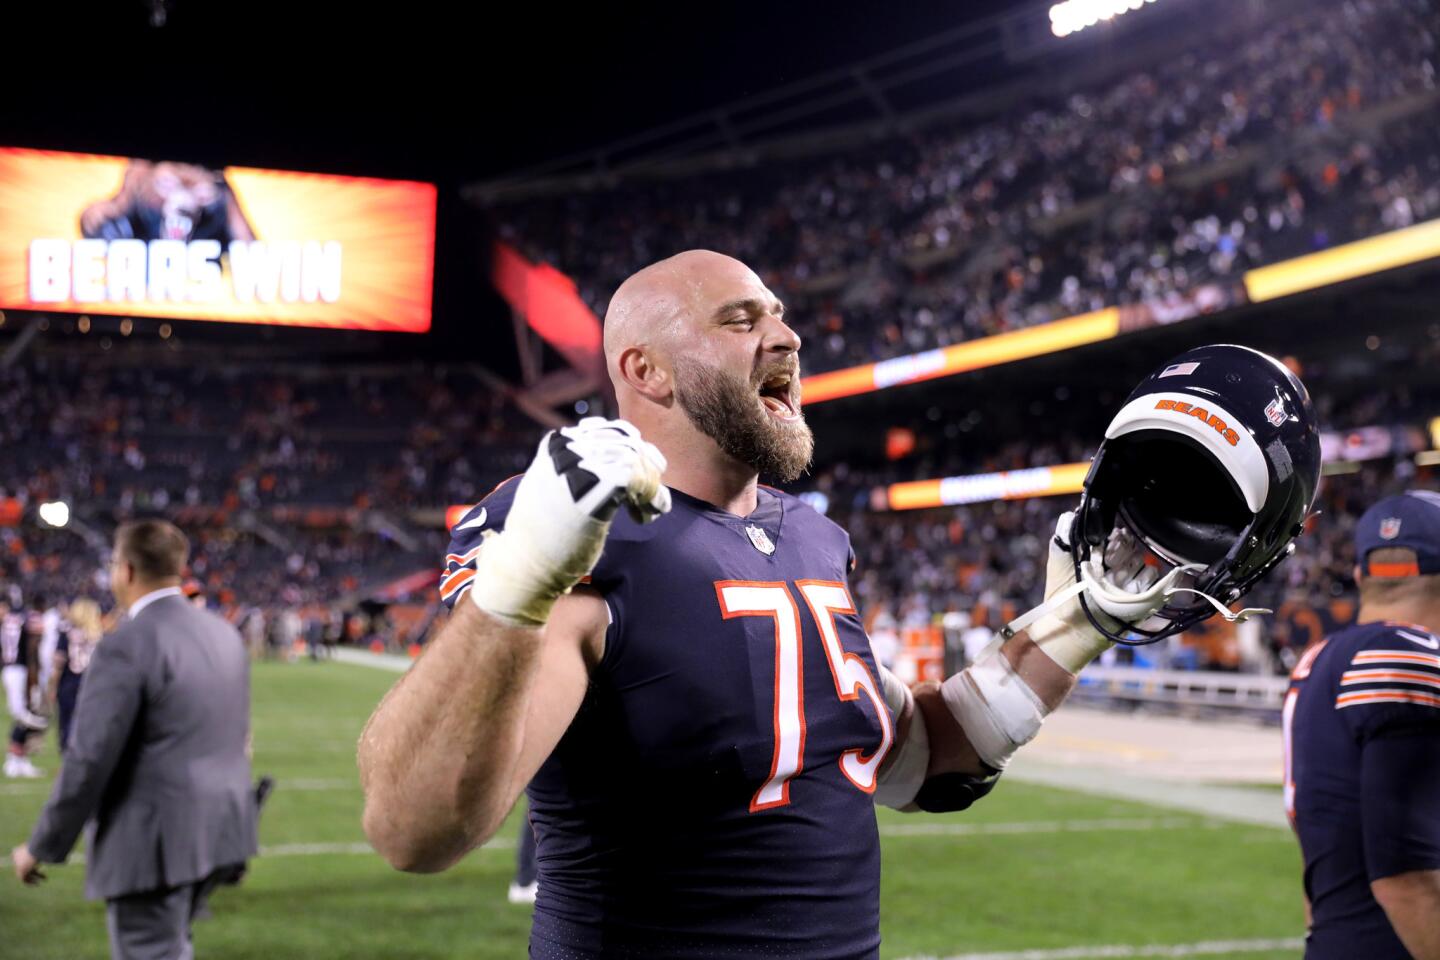 Bears offensive guard Kyle Long (75) celebrates after a victory over the Seahawks at Soldier Field on Monday, Sept. 17, 2018.